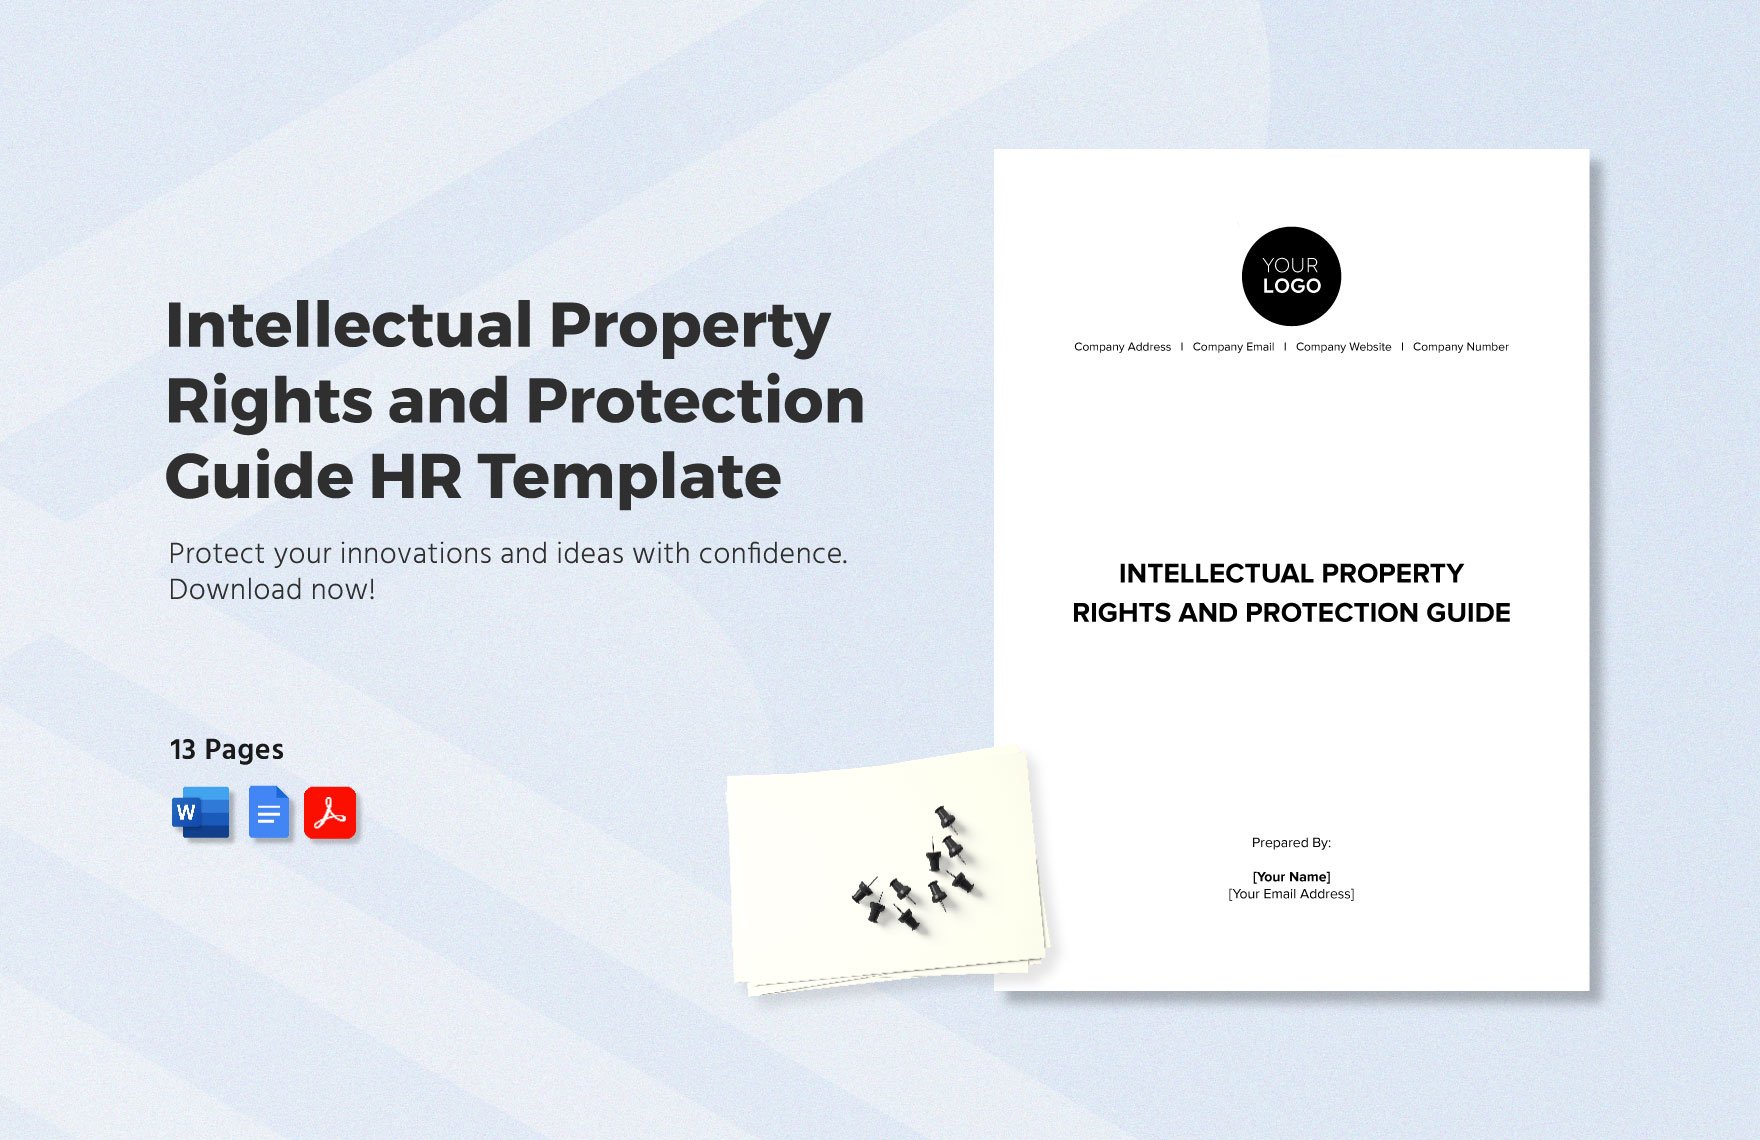 Intellectual Property Rights and Protection Guide HR Template